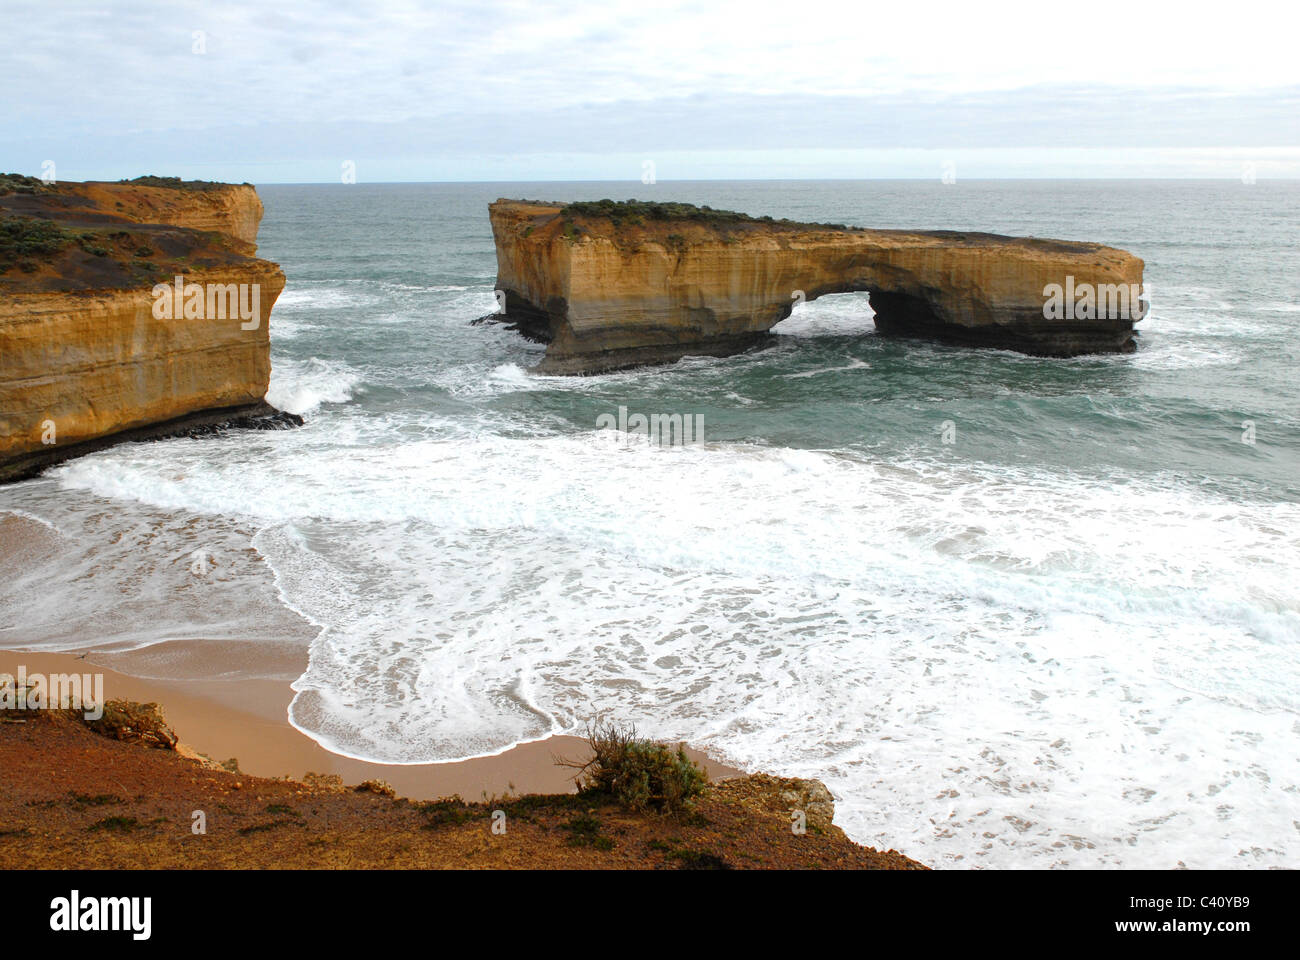 London Arch, formerly known as London Bridge, in Port Campbell National Park on the Great Ocean Road in Victoria, Australia Stock Photo